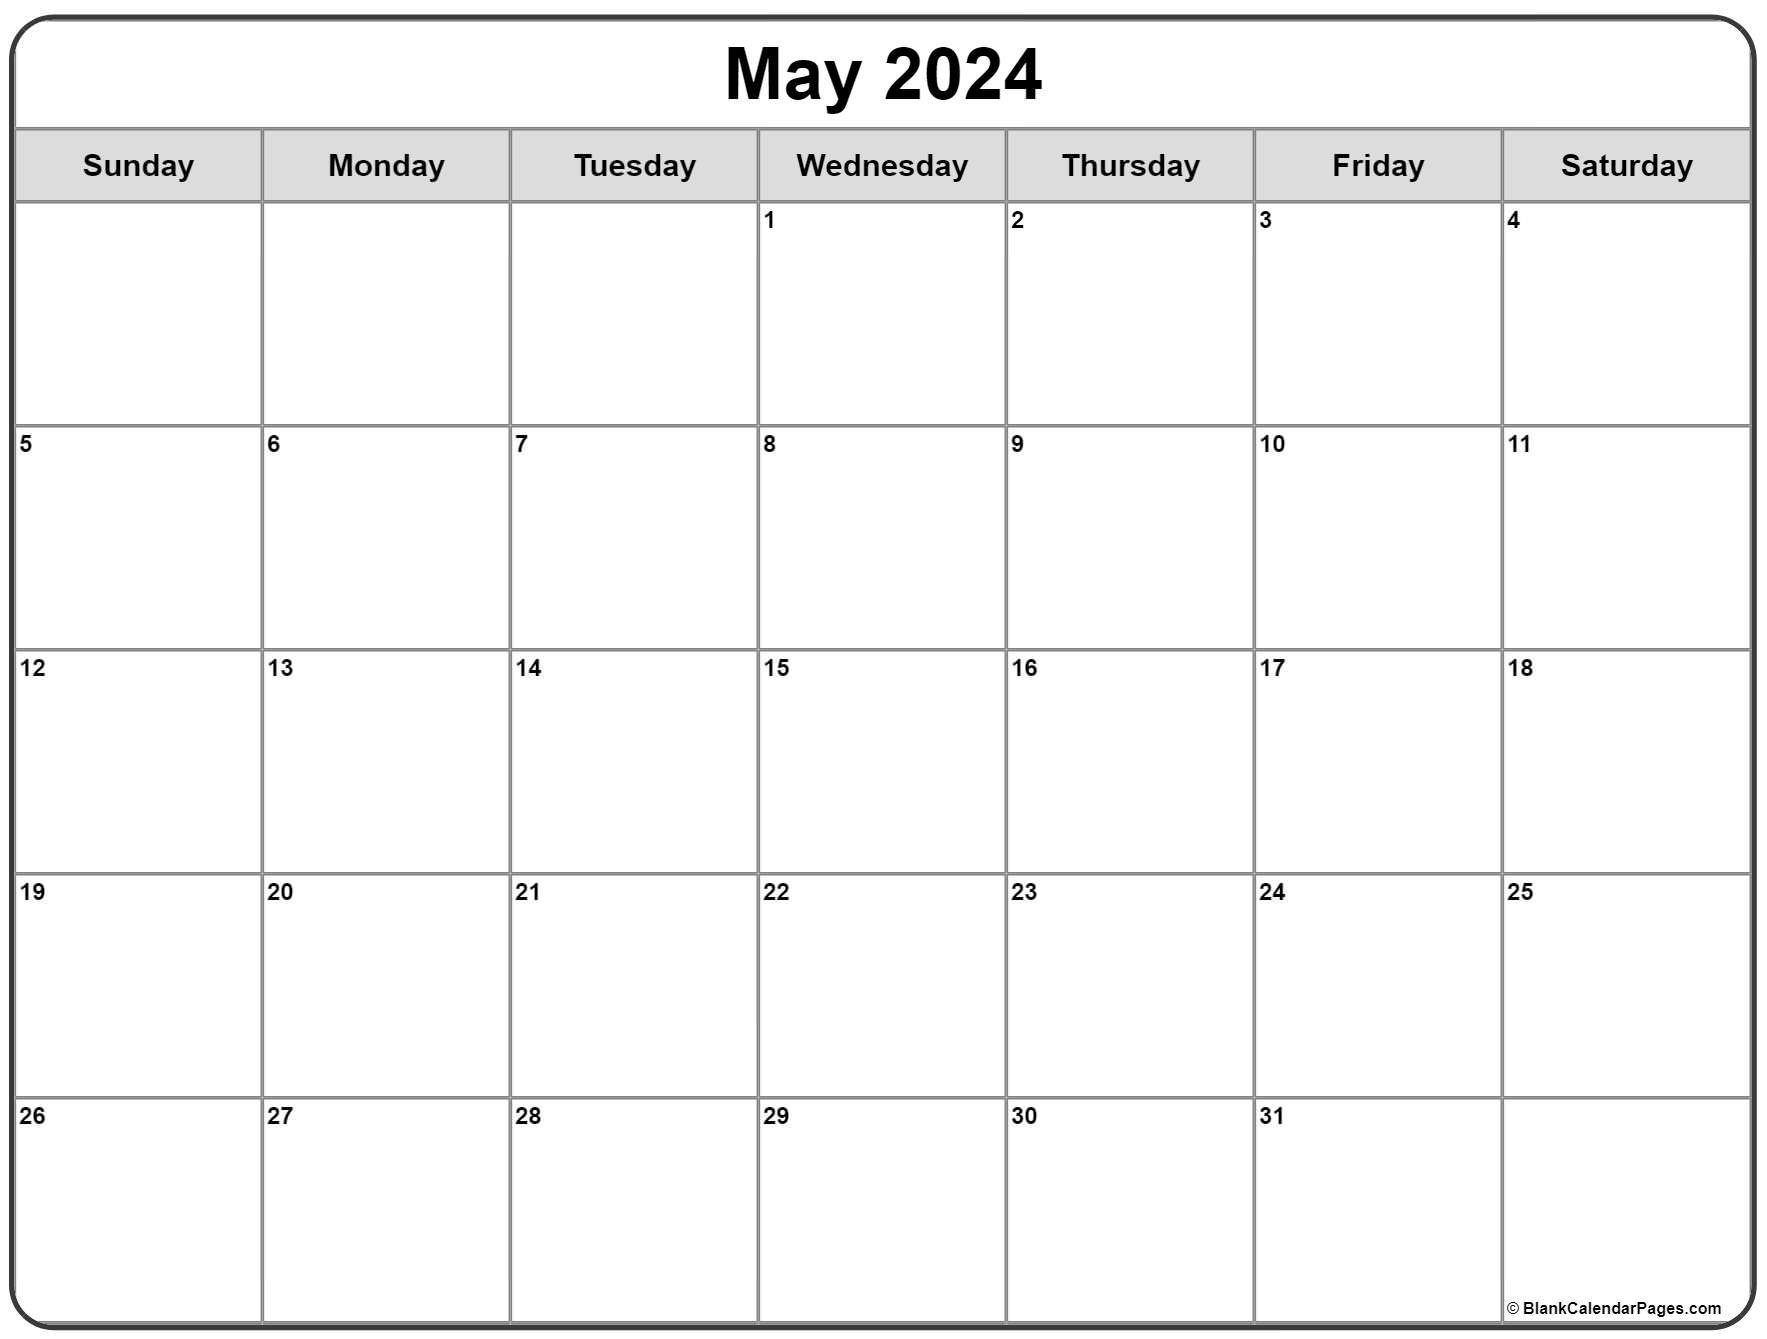 Free May 2024 Calendar To Print Easy April 2024 Calendar With Holidays